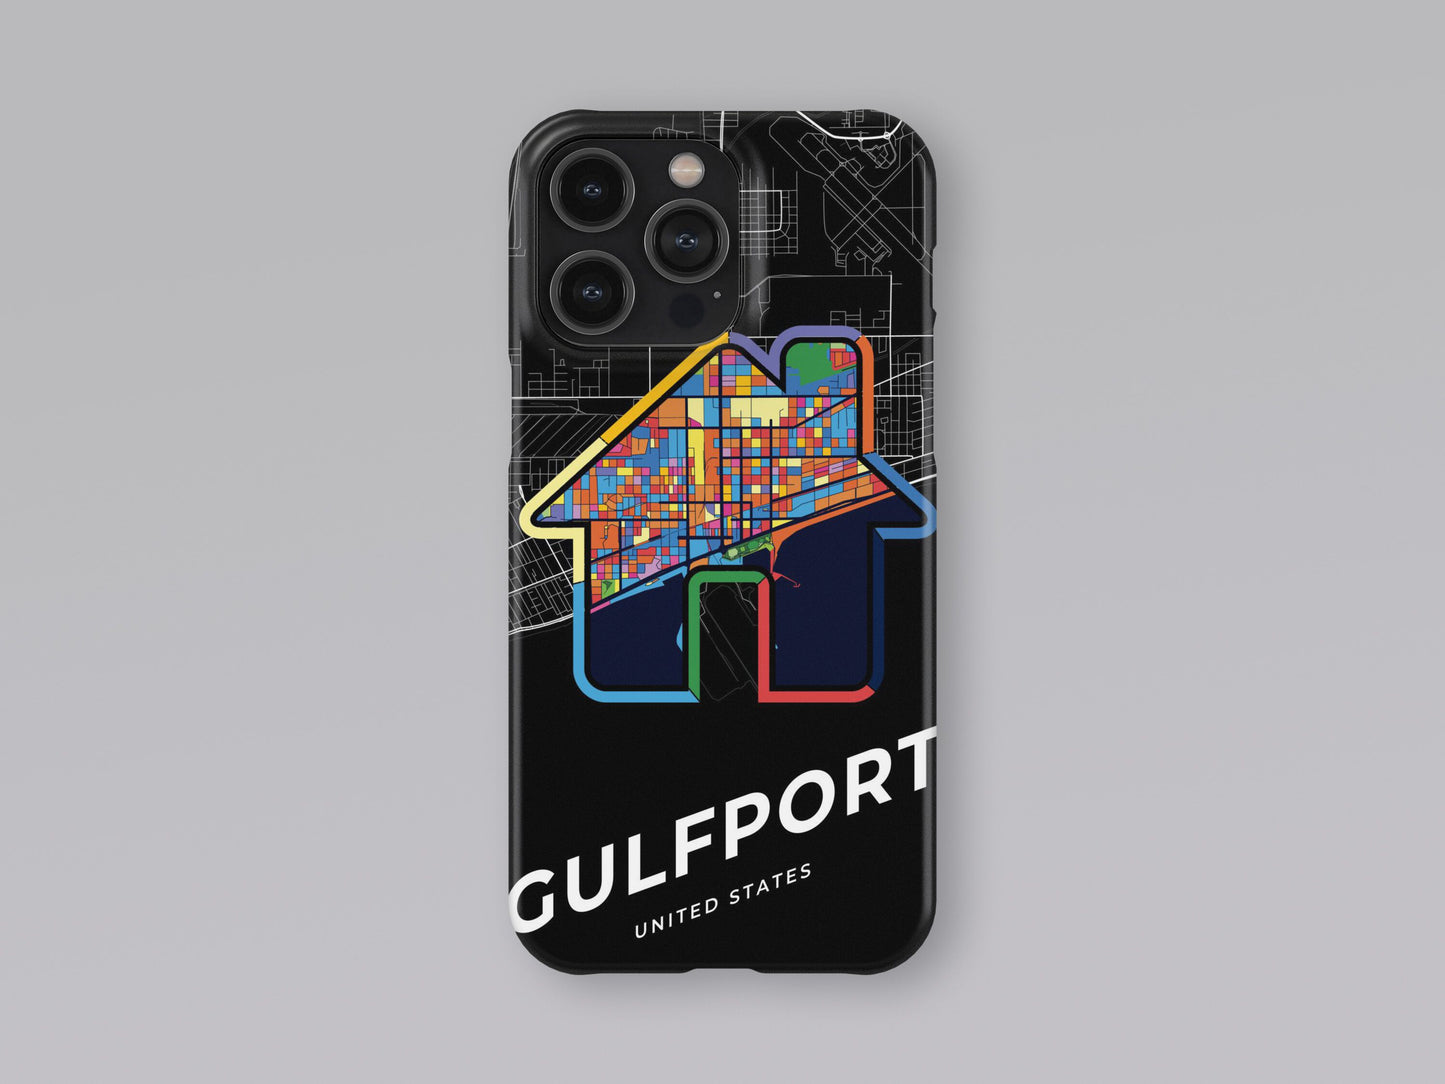 Gulfport Mississippi slim phone case with colorful icon. Birthday, wedding or housewarming gift. Couple match cases. 3